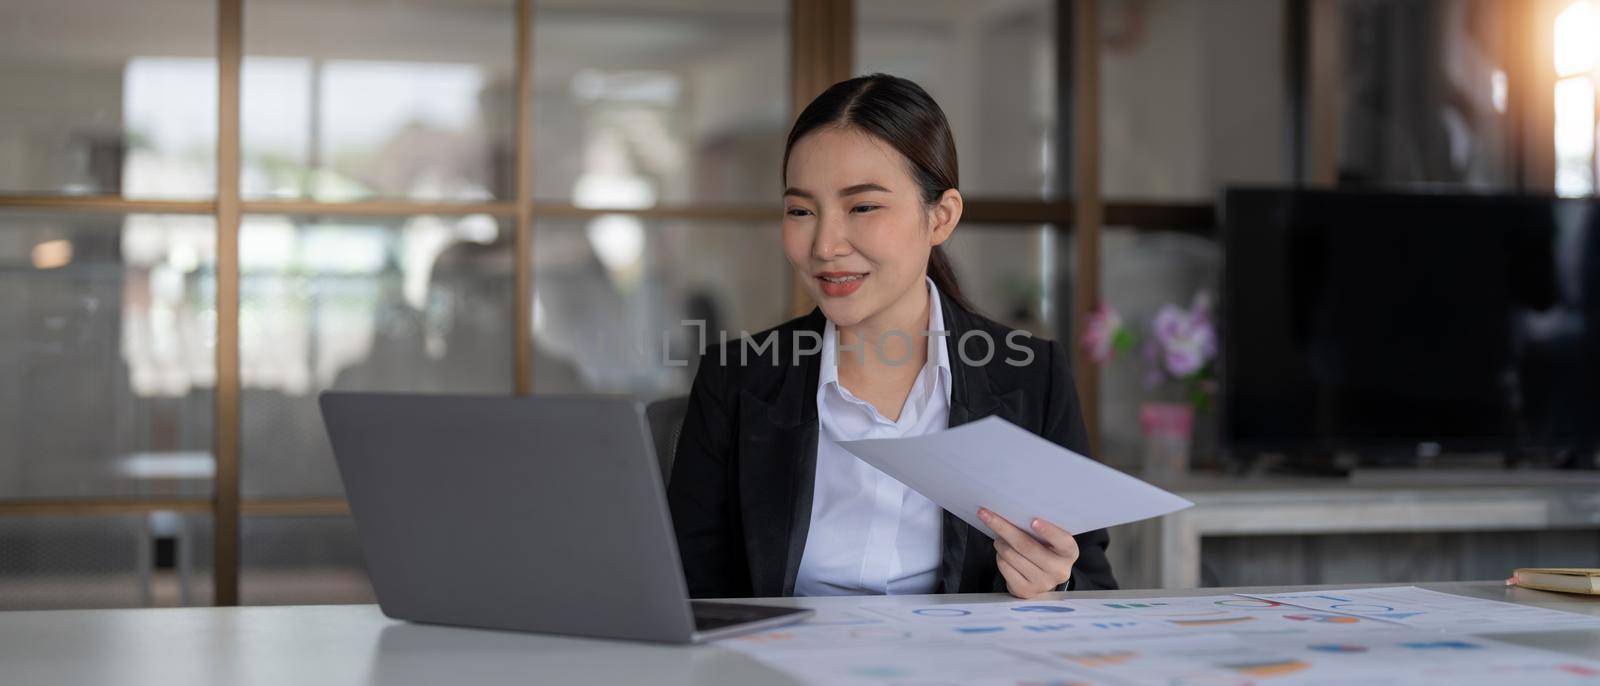 Portrait business woman accountant working audit and calculating expense financial annual financial report balance sheet statement, doing finance making notes on paper checking document